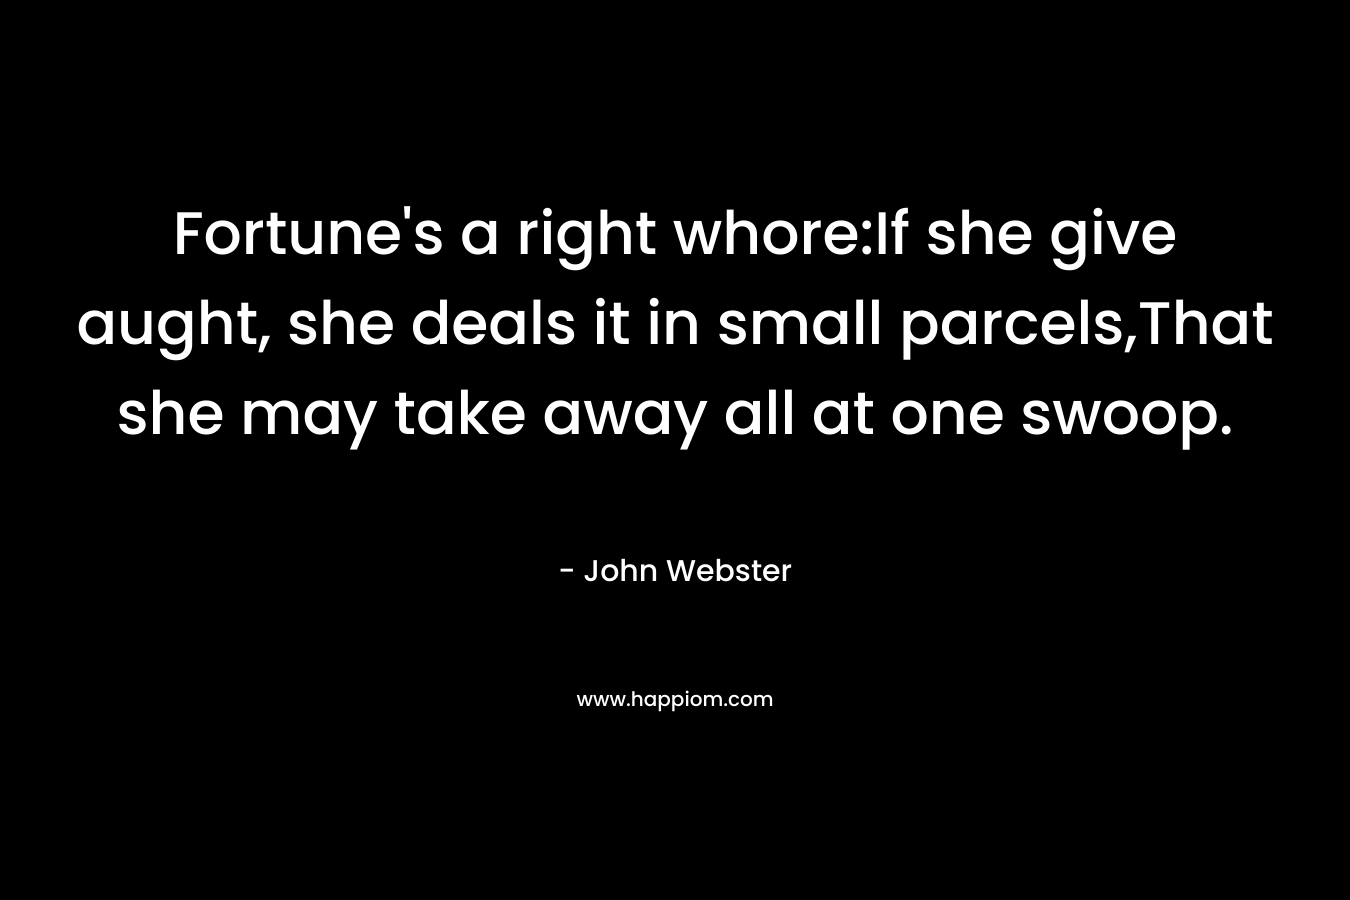 Fortune’s a right whore:If she give aught, she deals it in small parcels,That she may take away all at one swoop. – John Webster